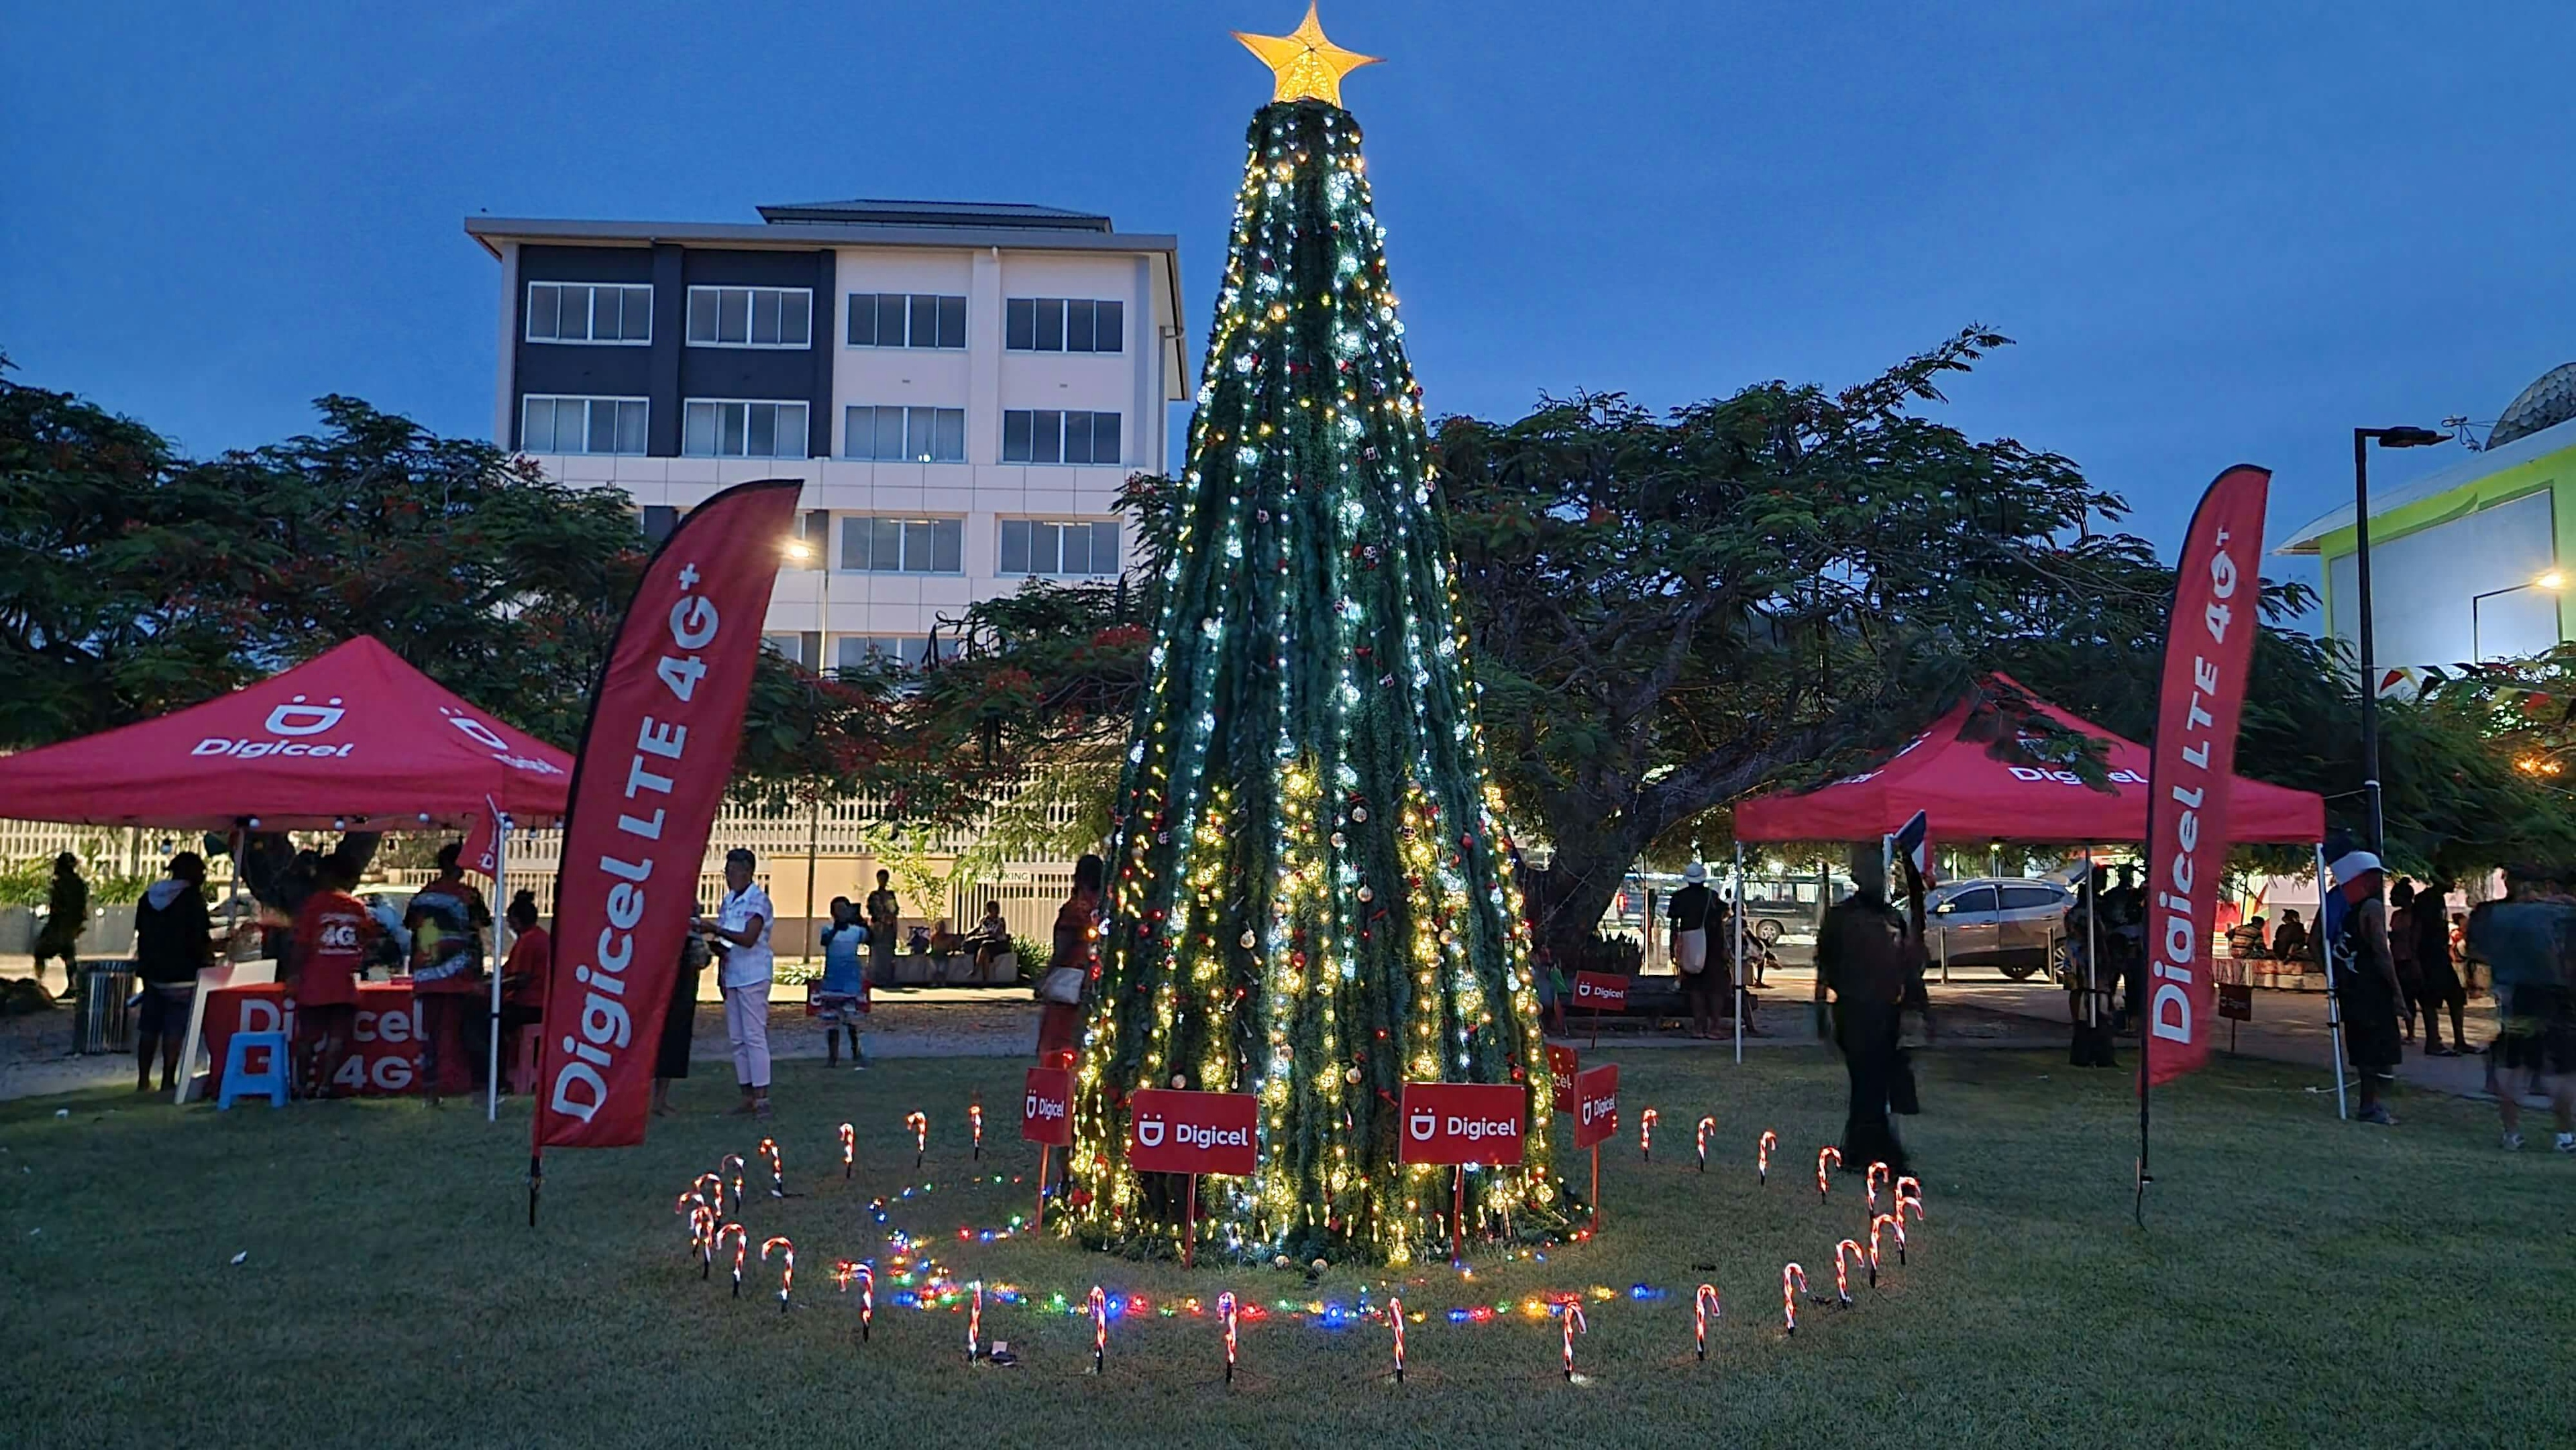 A large Christmas tree with a star on top at Feiwia Park, Port Vila